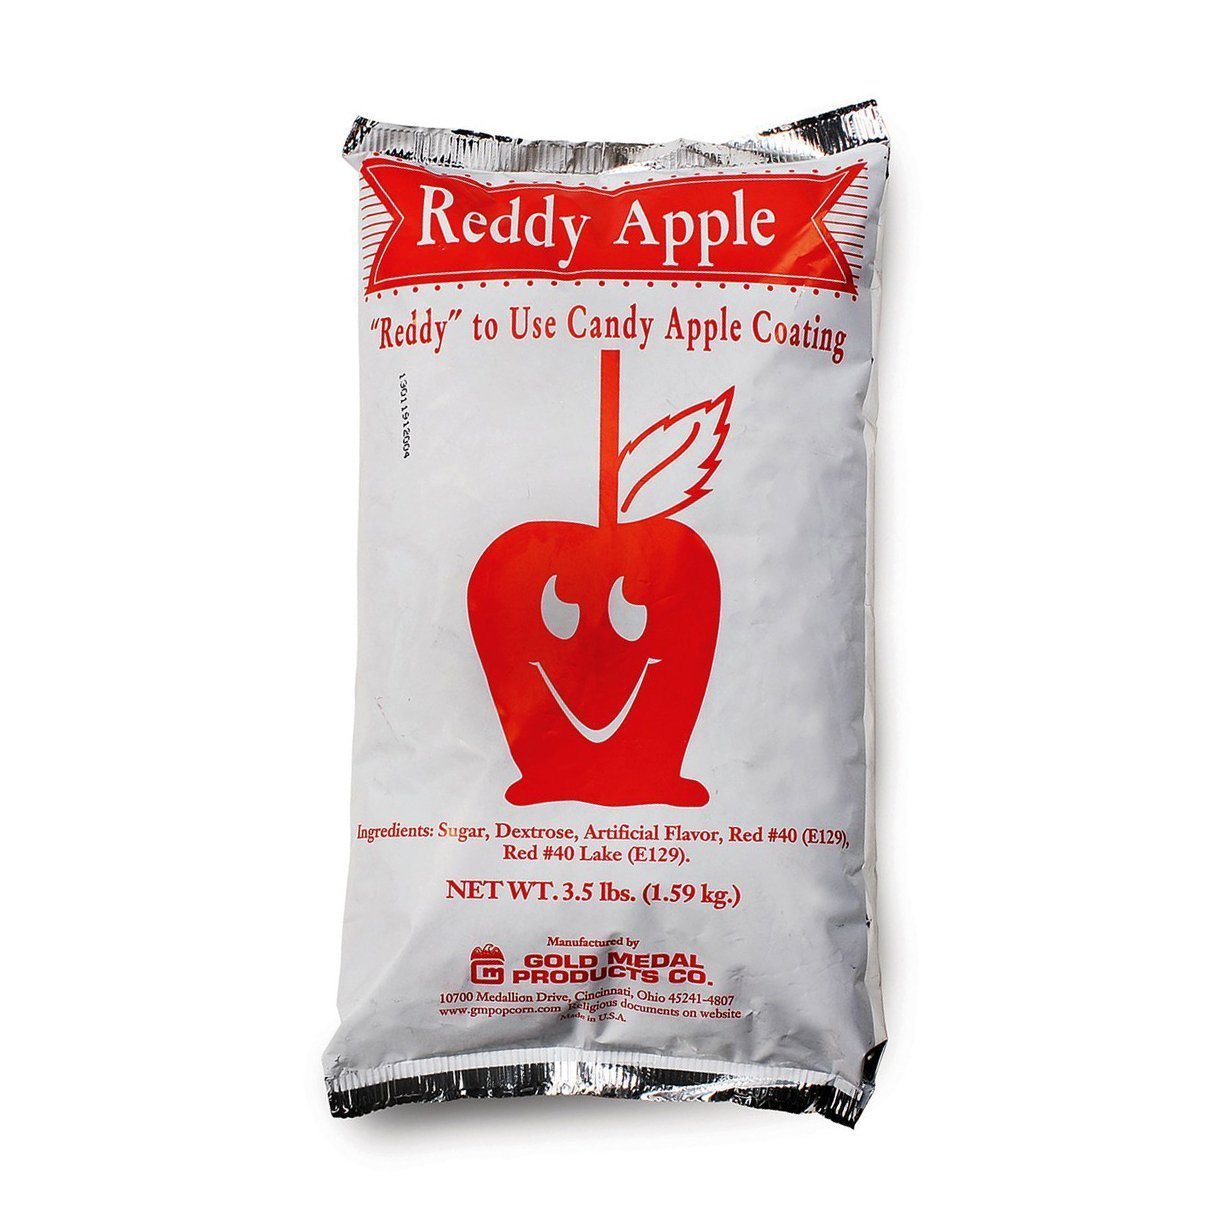 Reddy Toffee Apple Mix